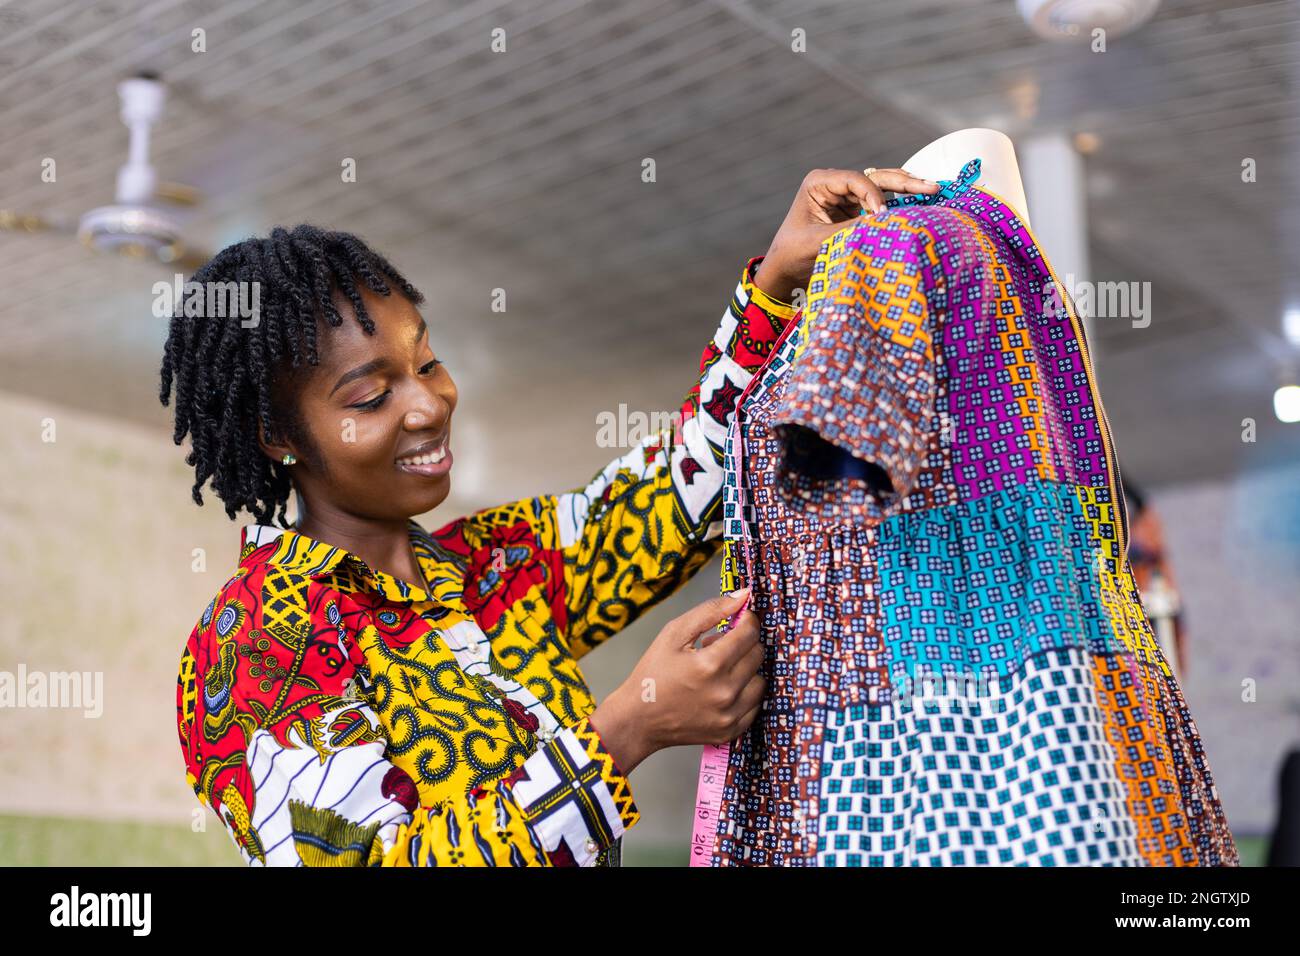 Smiling Ghanaian Dressmaker with locs hair measures a part of her colorful African pattern dress in her studio Stock Photo